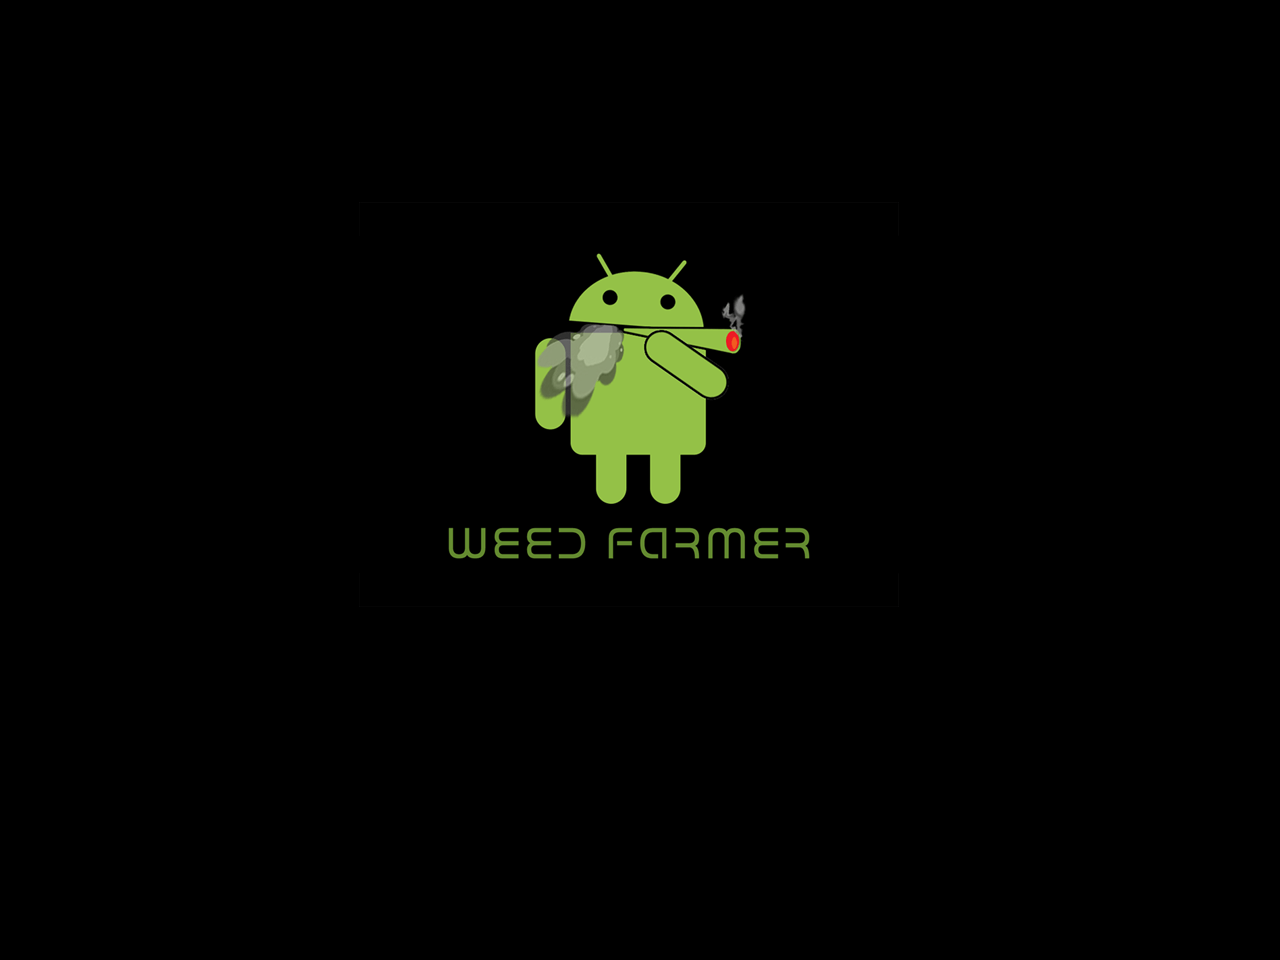 Weed Wallpaper For Android